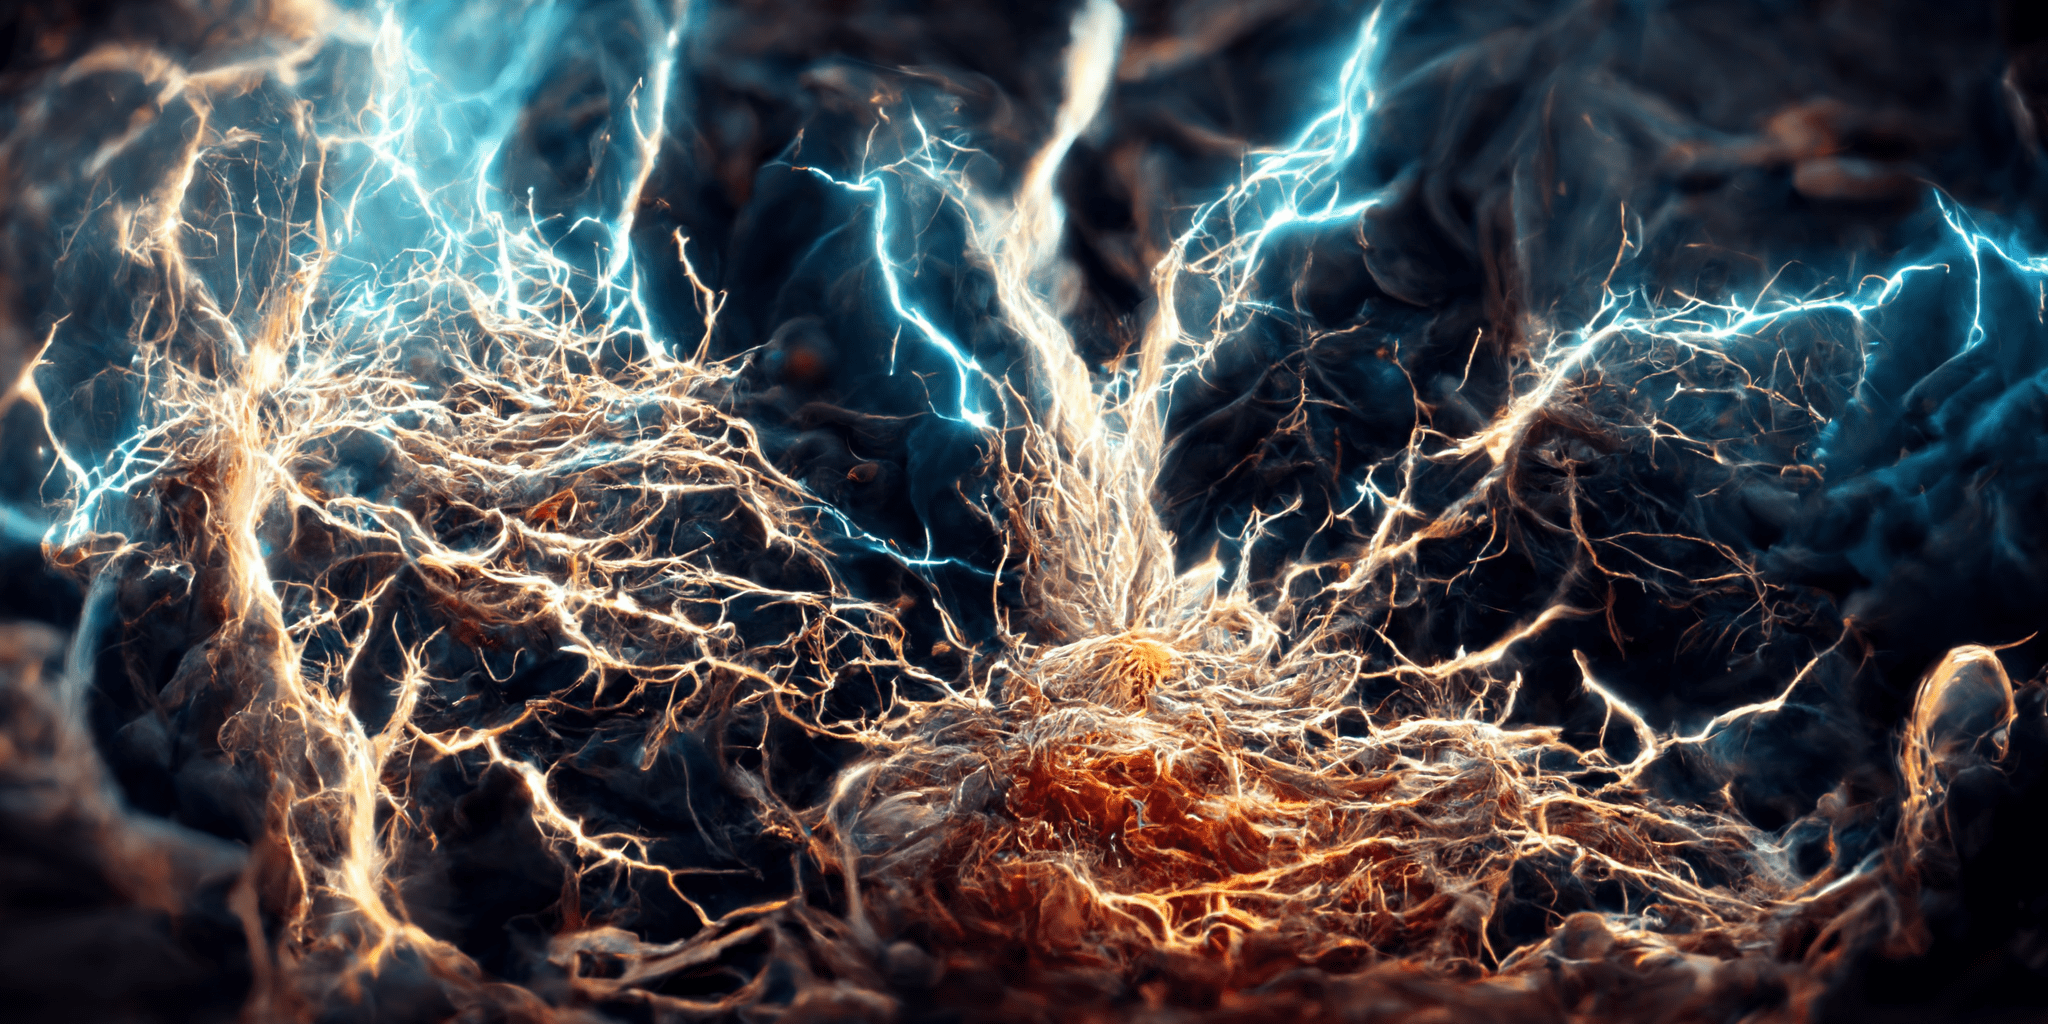 Flashes of lightning – seed of nature